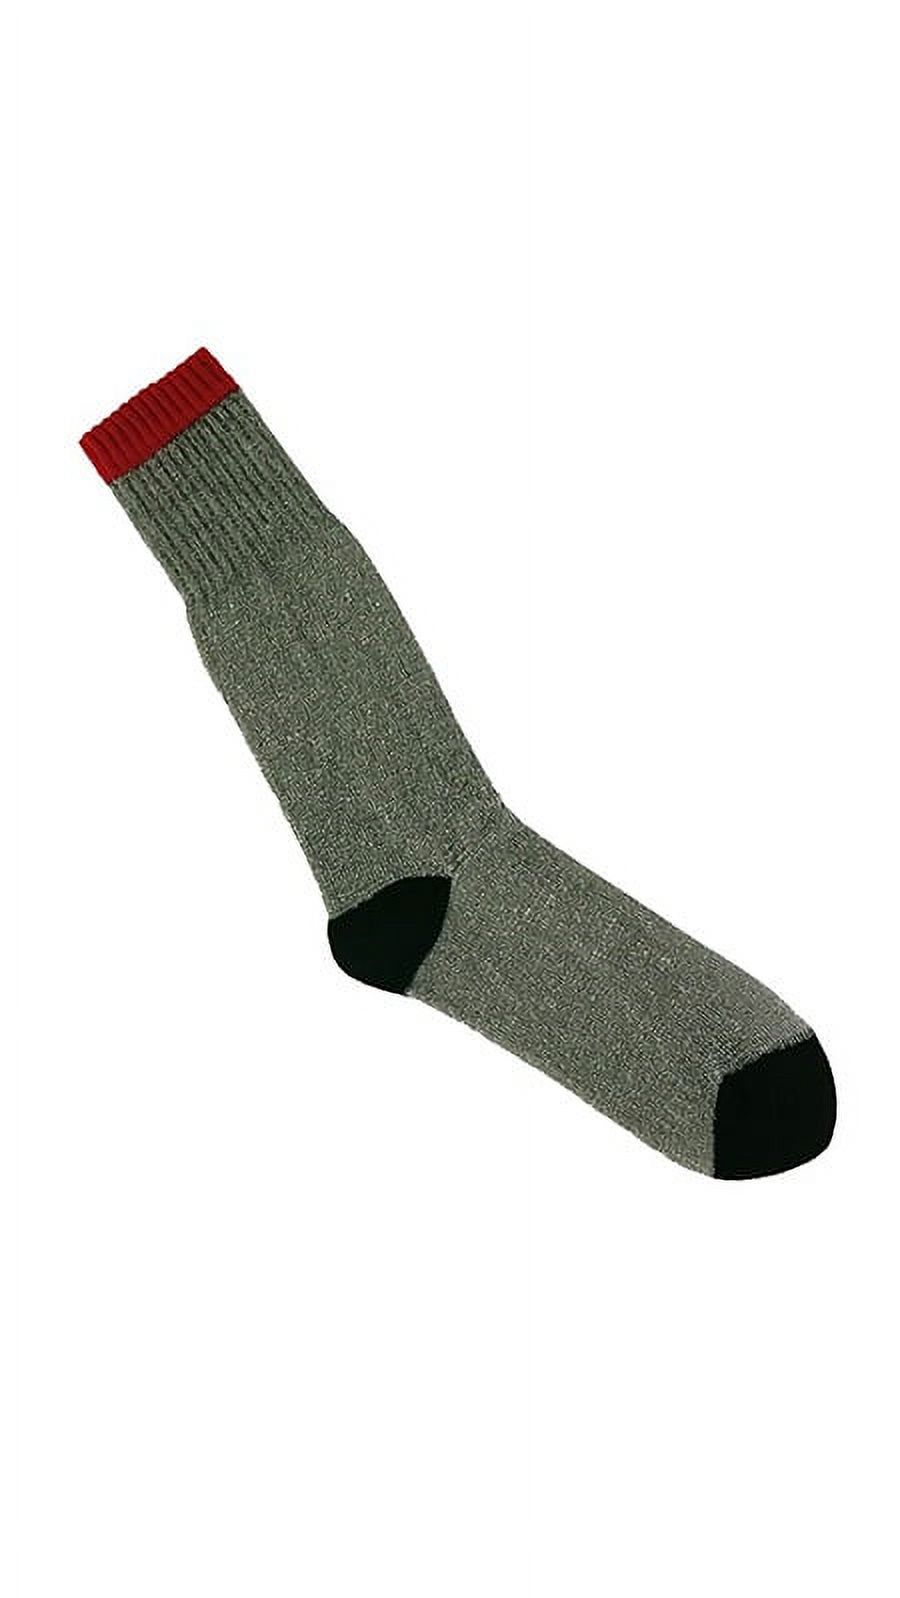 $averPak 2 Pack - Includes 2 Pair Ruggeds Cotton Blend Thermal Socks (2 Pair Per Band Size 9-11) - image 3 of 3